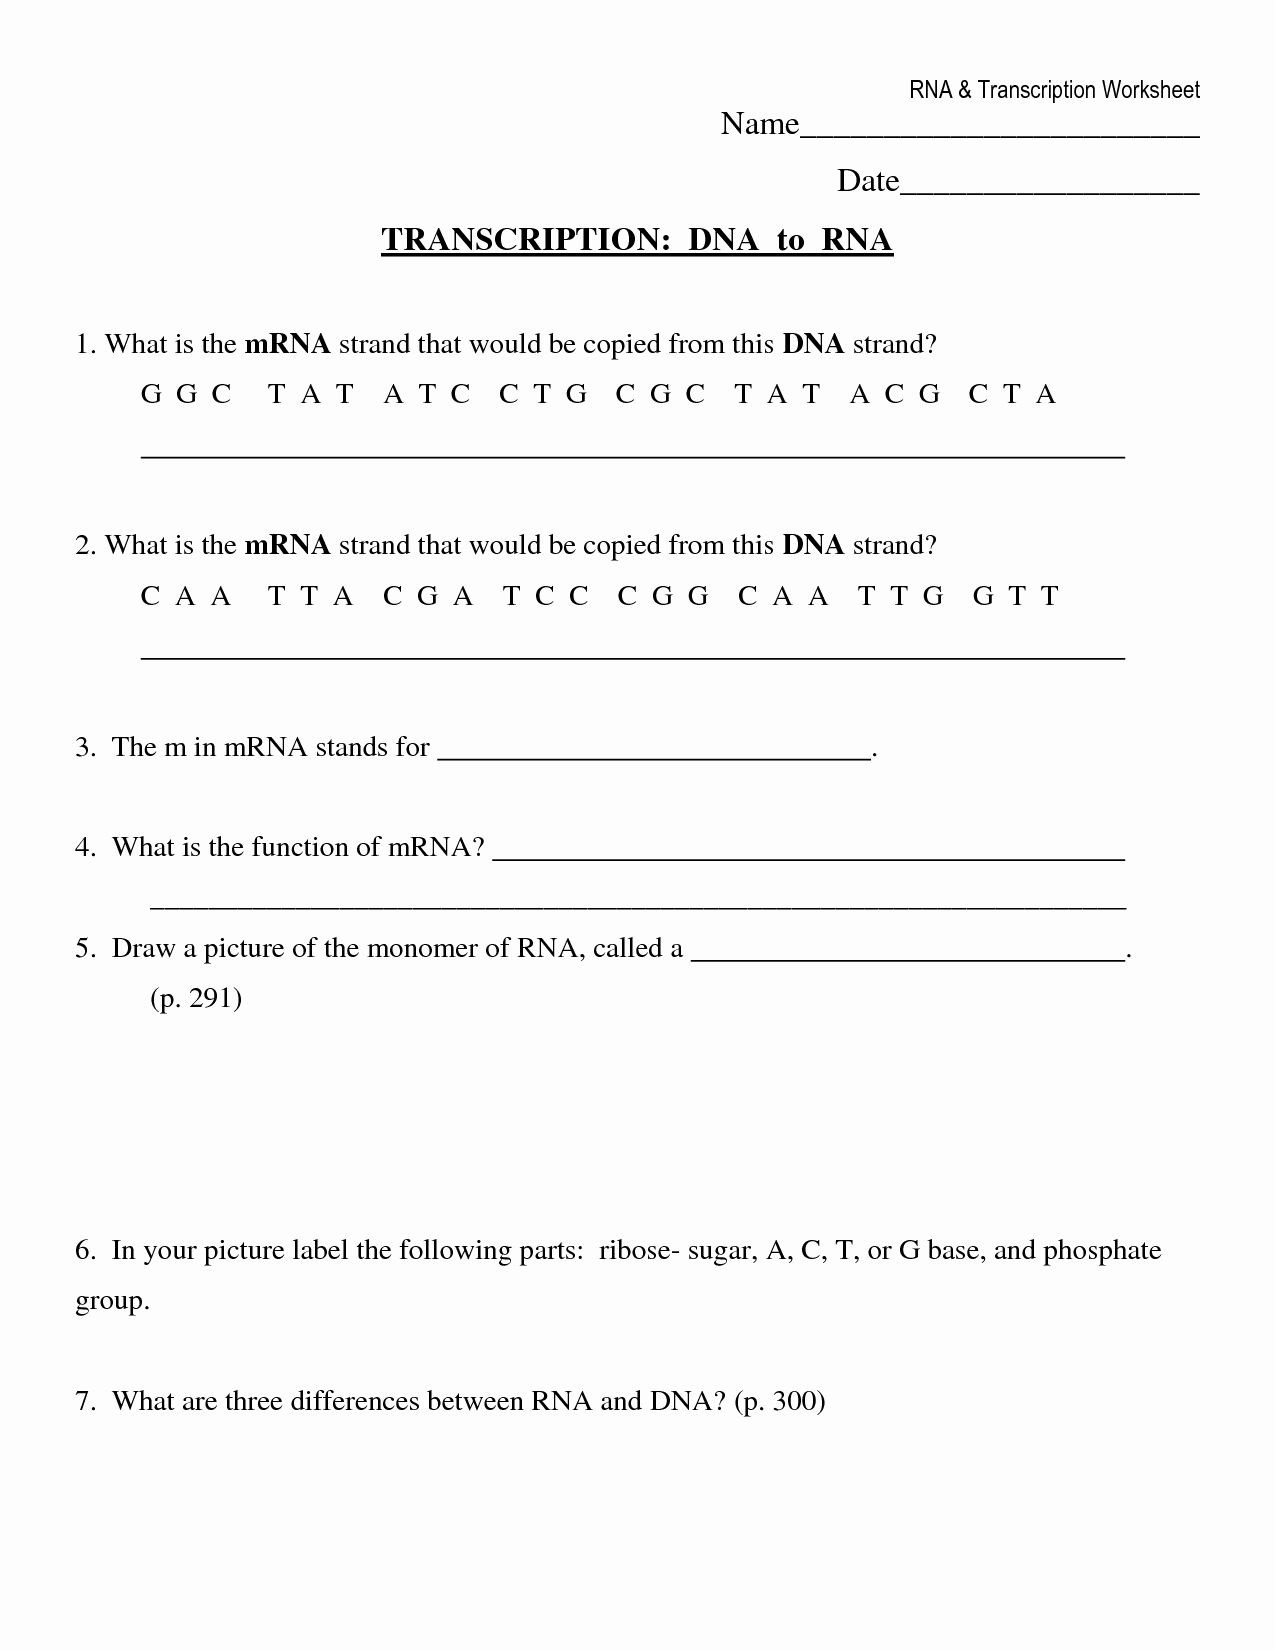 Dna and Rna Worksheet Answers 50 Dna and Rna Worksheet Answers In 2020 with Images